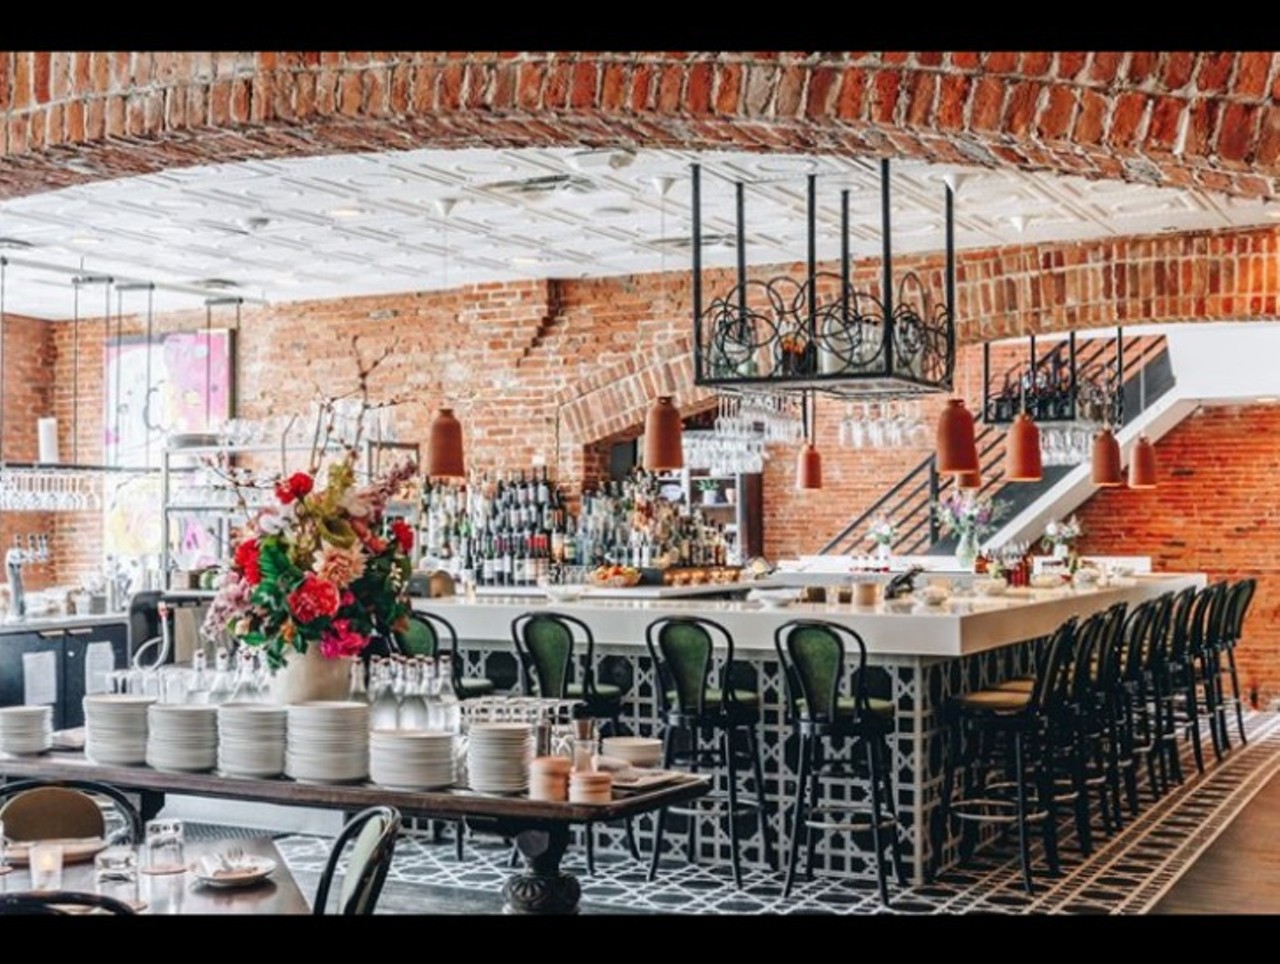 Aventura
216 W. Washington St., Ann Arbor
This Spanish-inspired restaurant and bar includes beautiful red brick walls paired with modern style furniture.
Photo courtesy of @aventura_ann_arbor